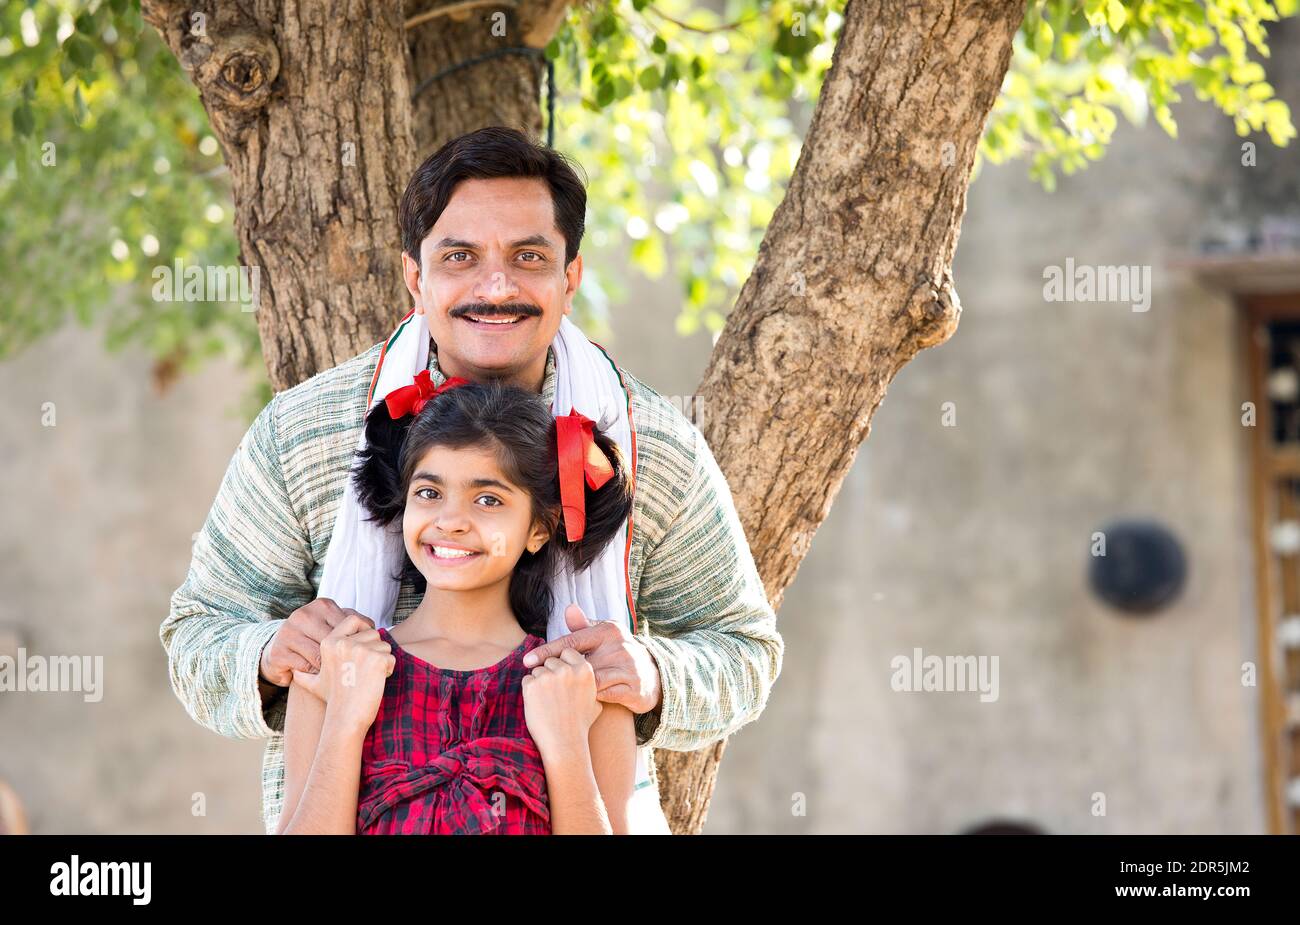 Rural Indian father with daughter looking at camera Stock Photo